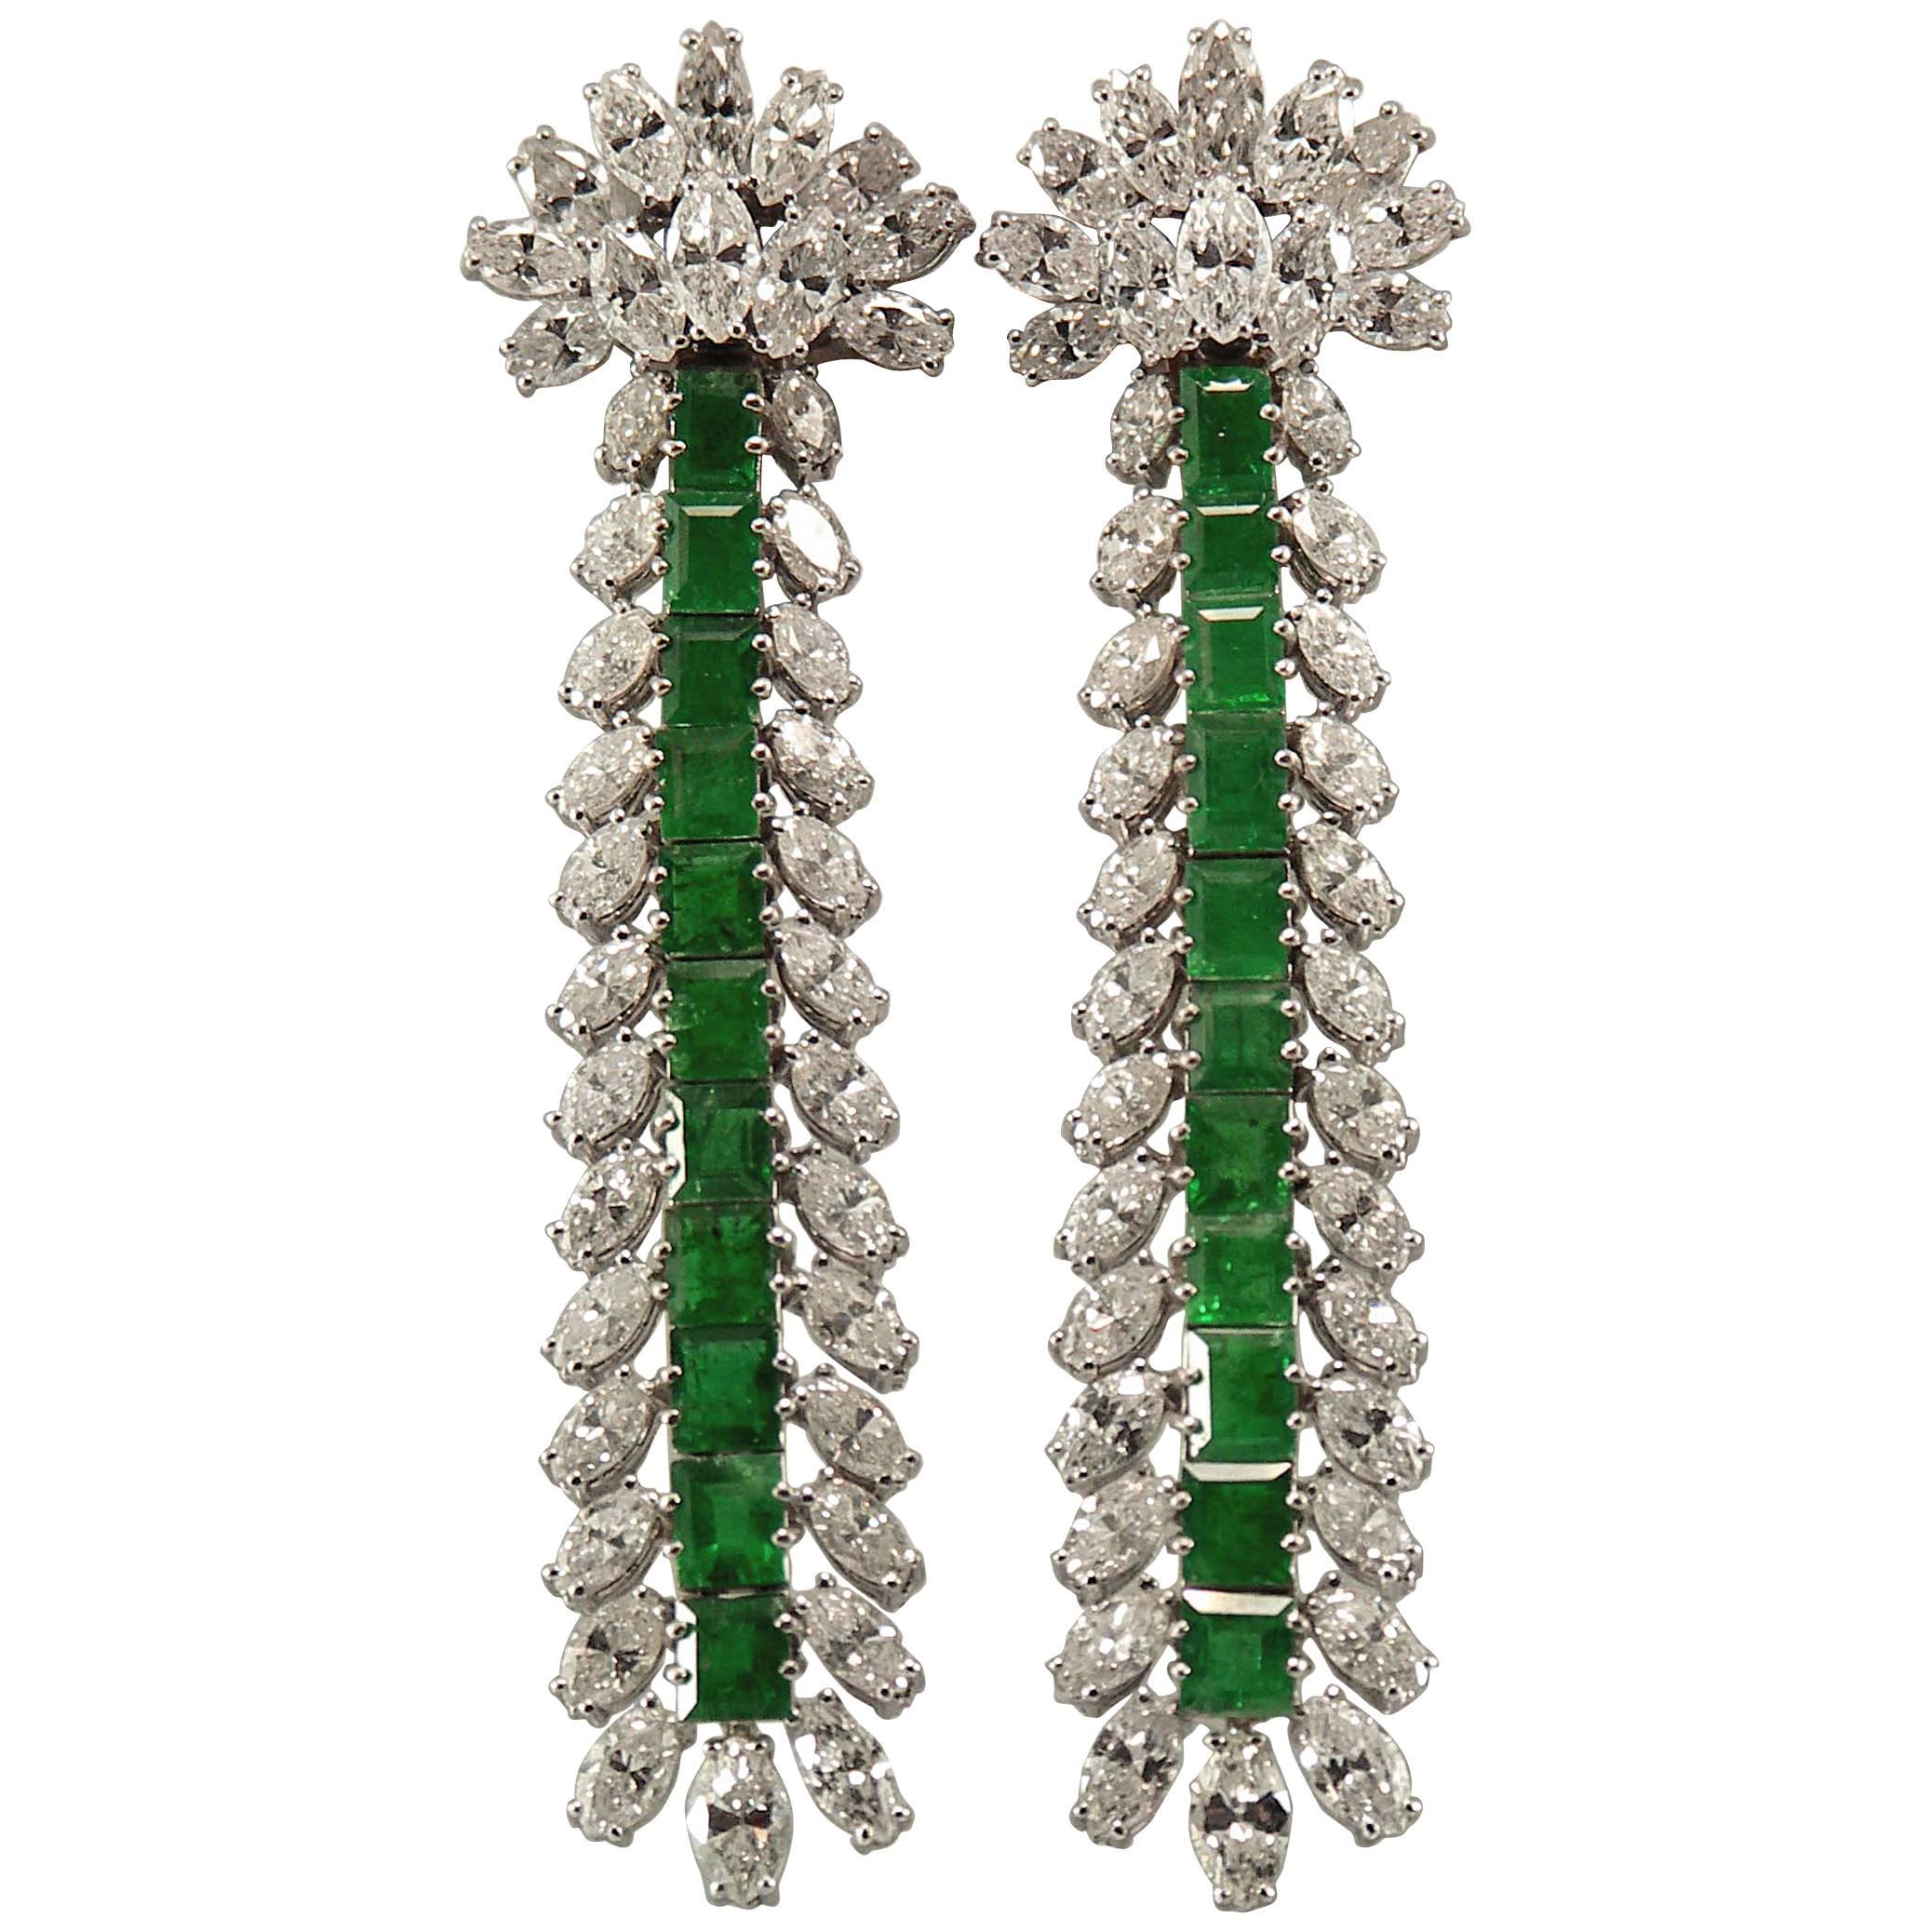 Extra Long, Platinum, Emerald and Diamond Cocktail Earrings